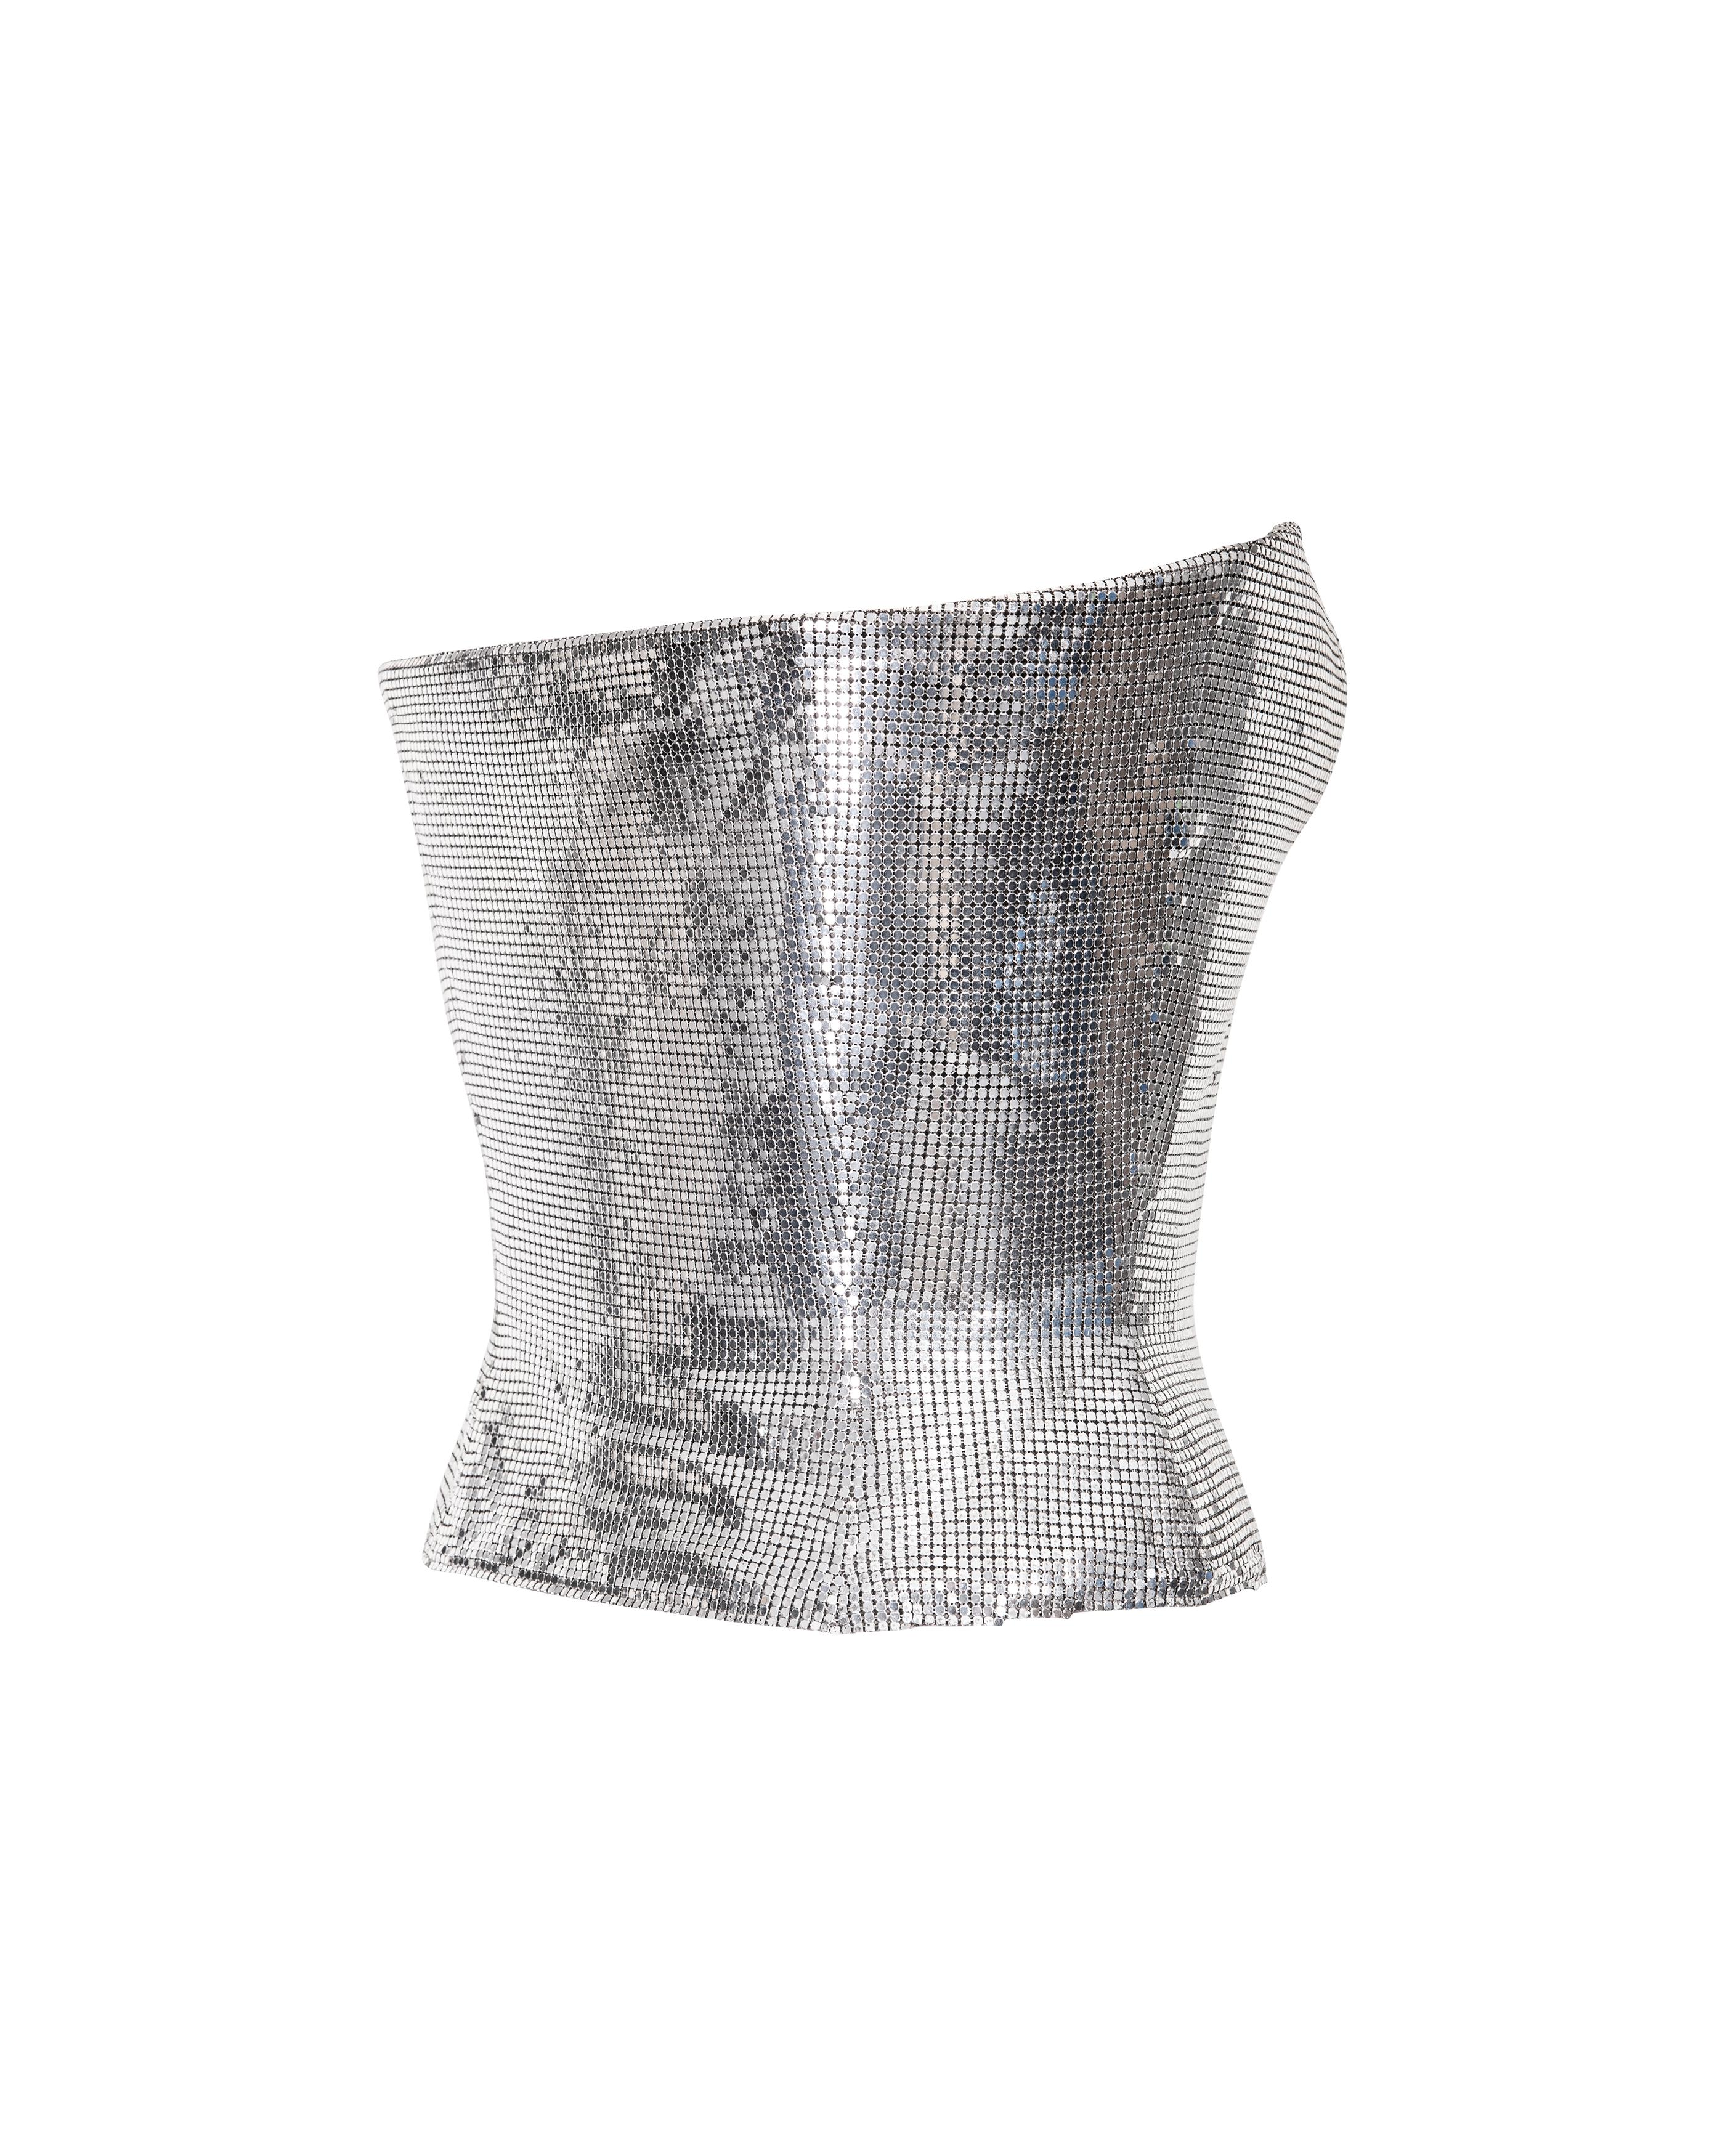 Women's A/W 1998 Gianni Versace Silver Oroton Chainmail Corset